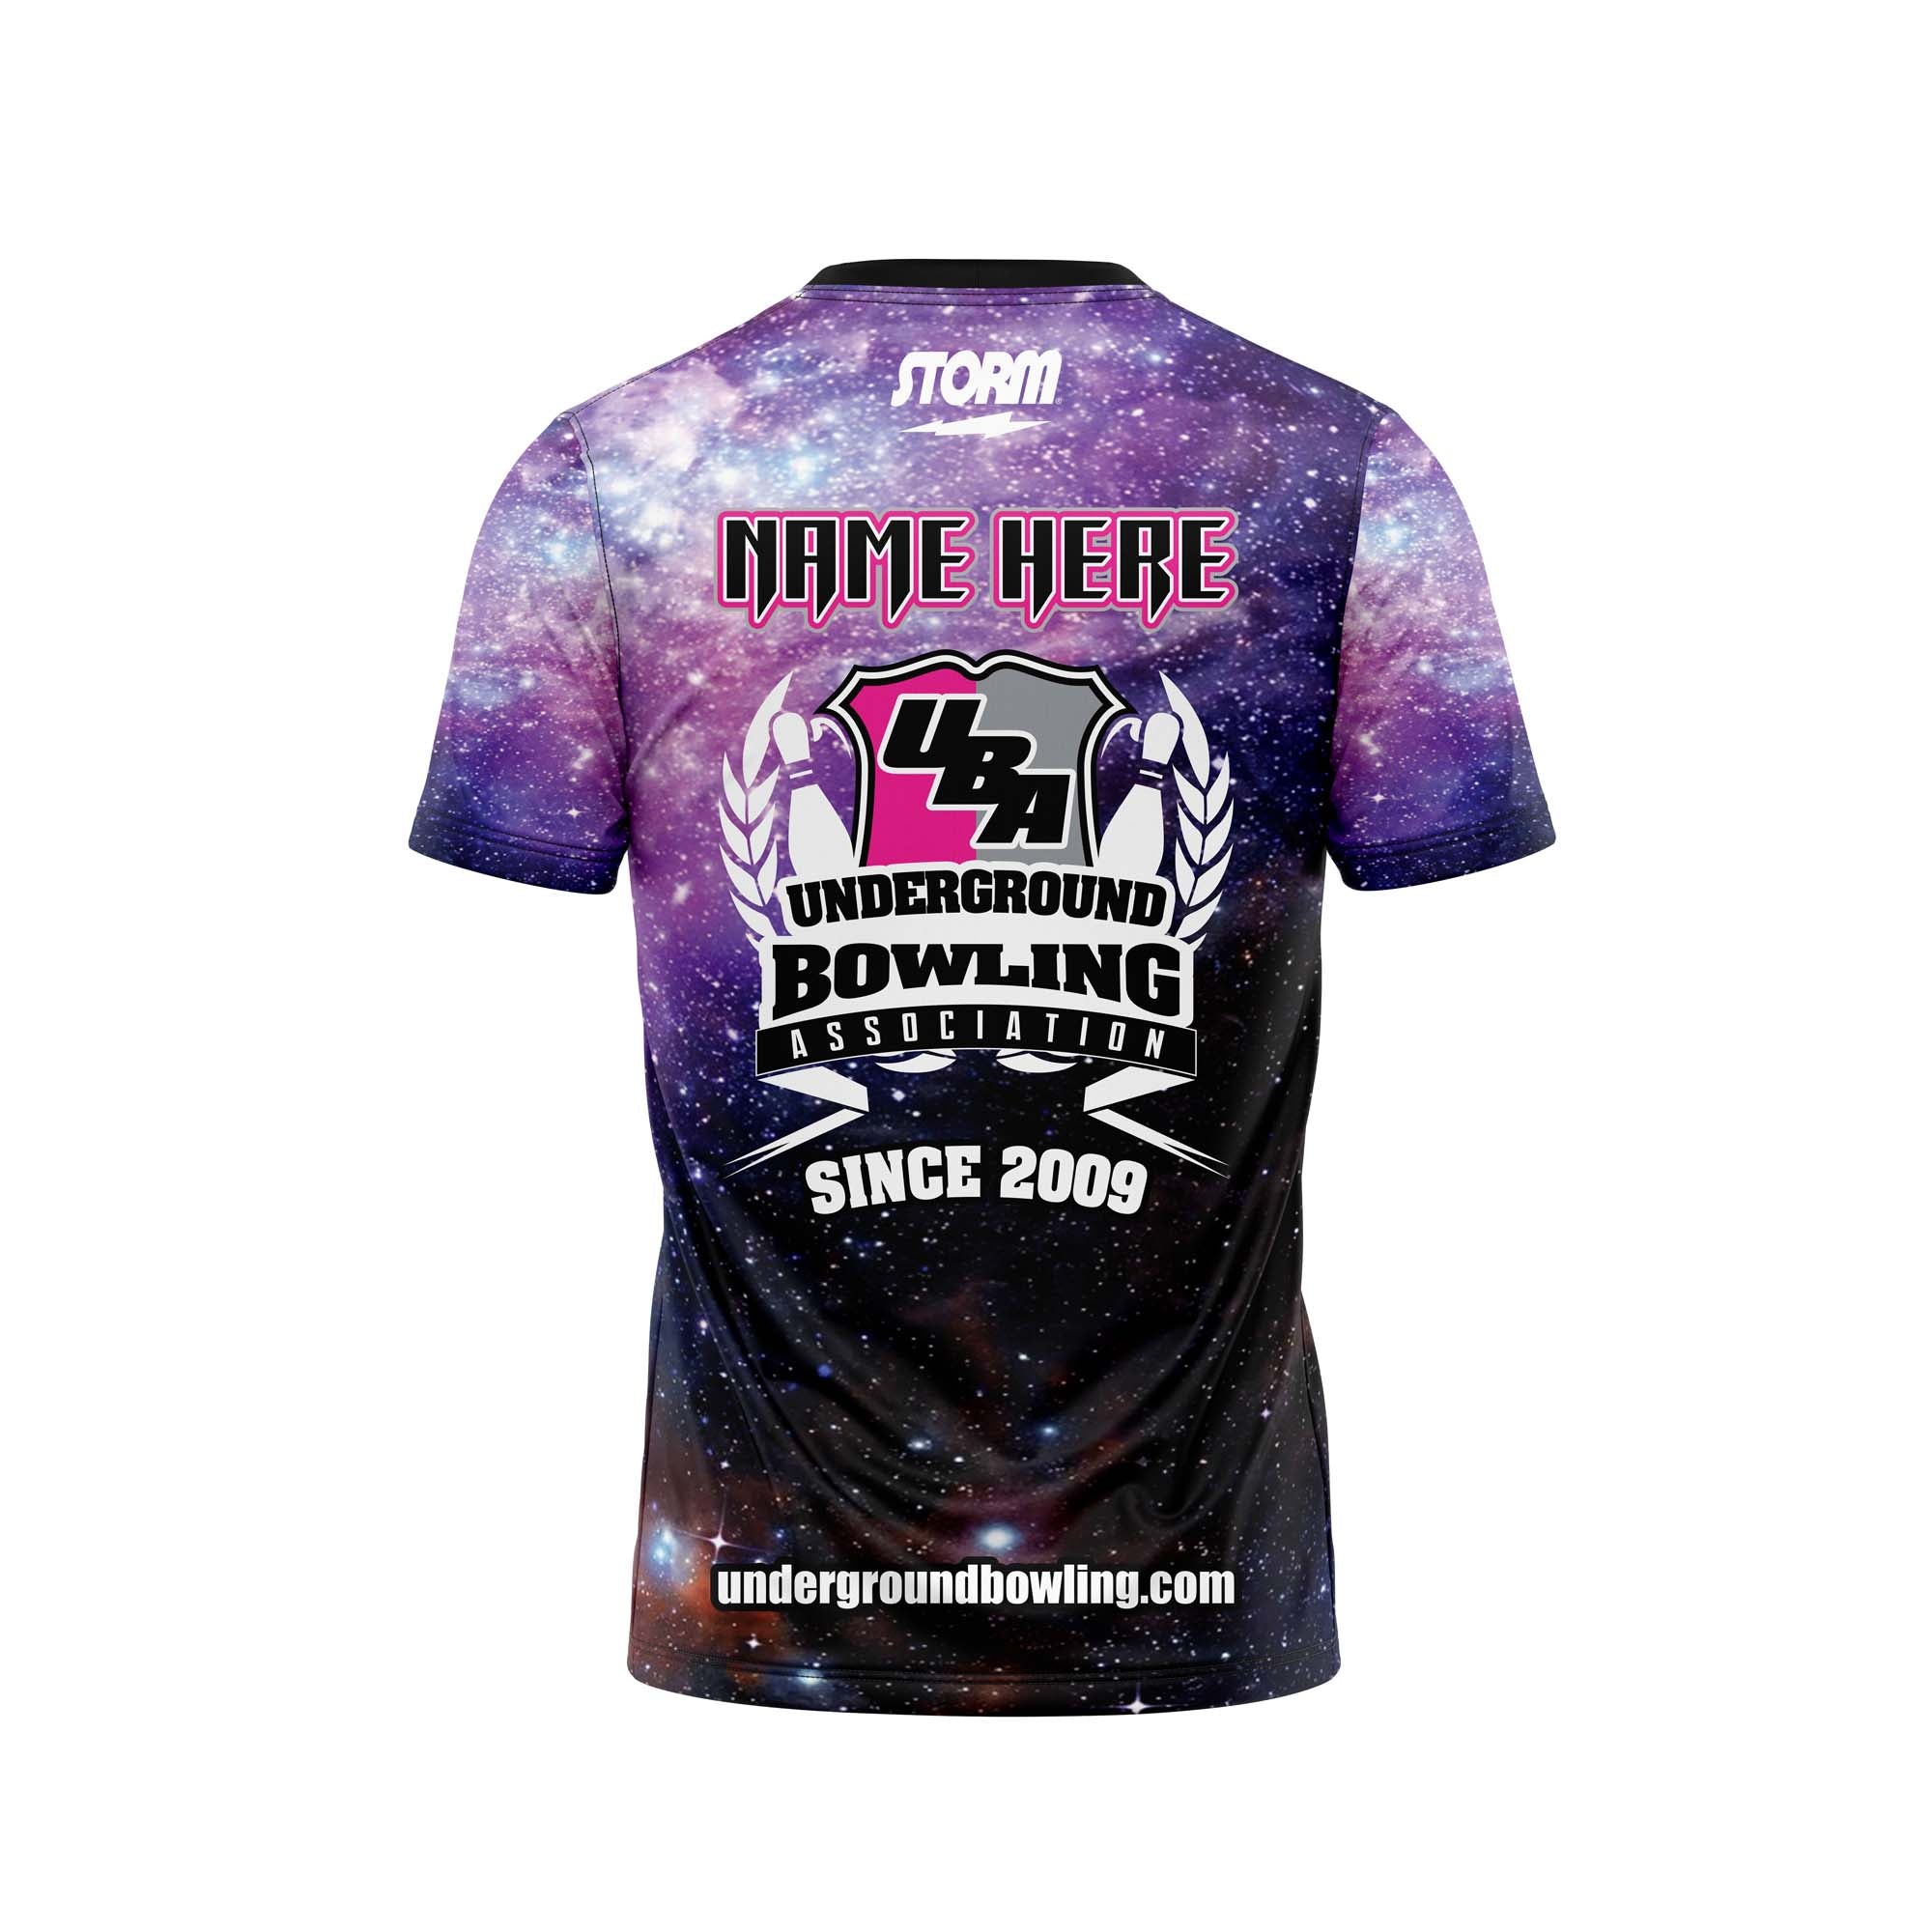 Goat Space Jersey